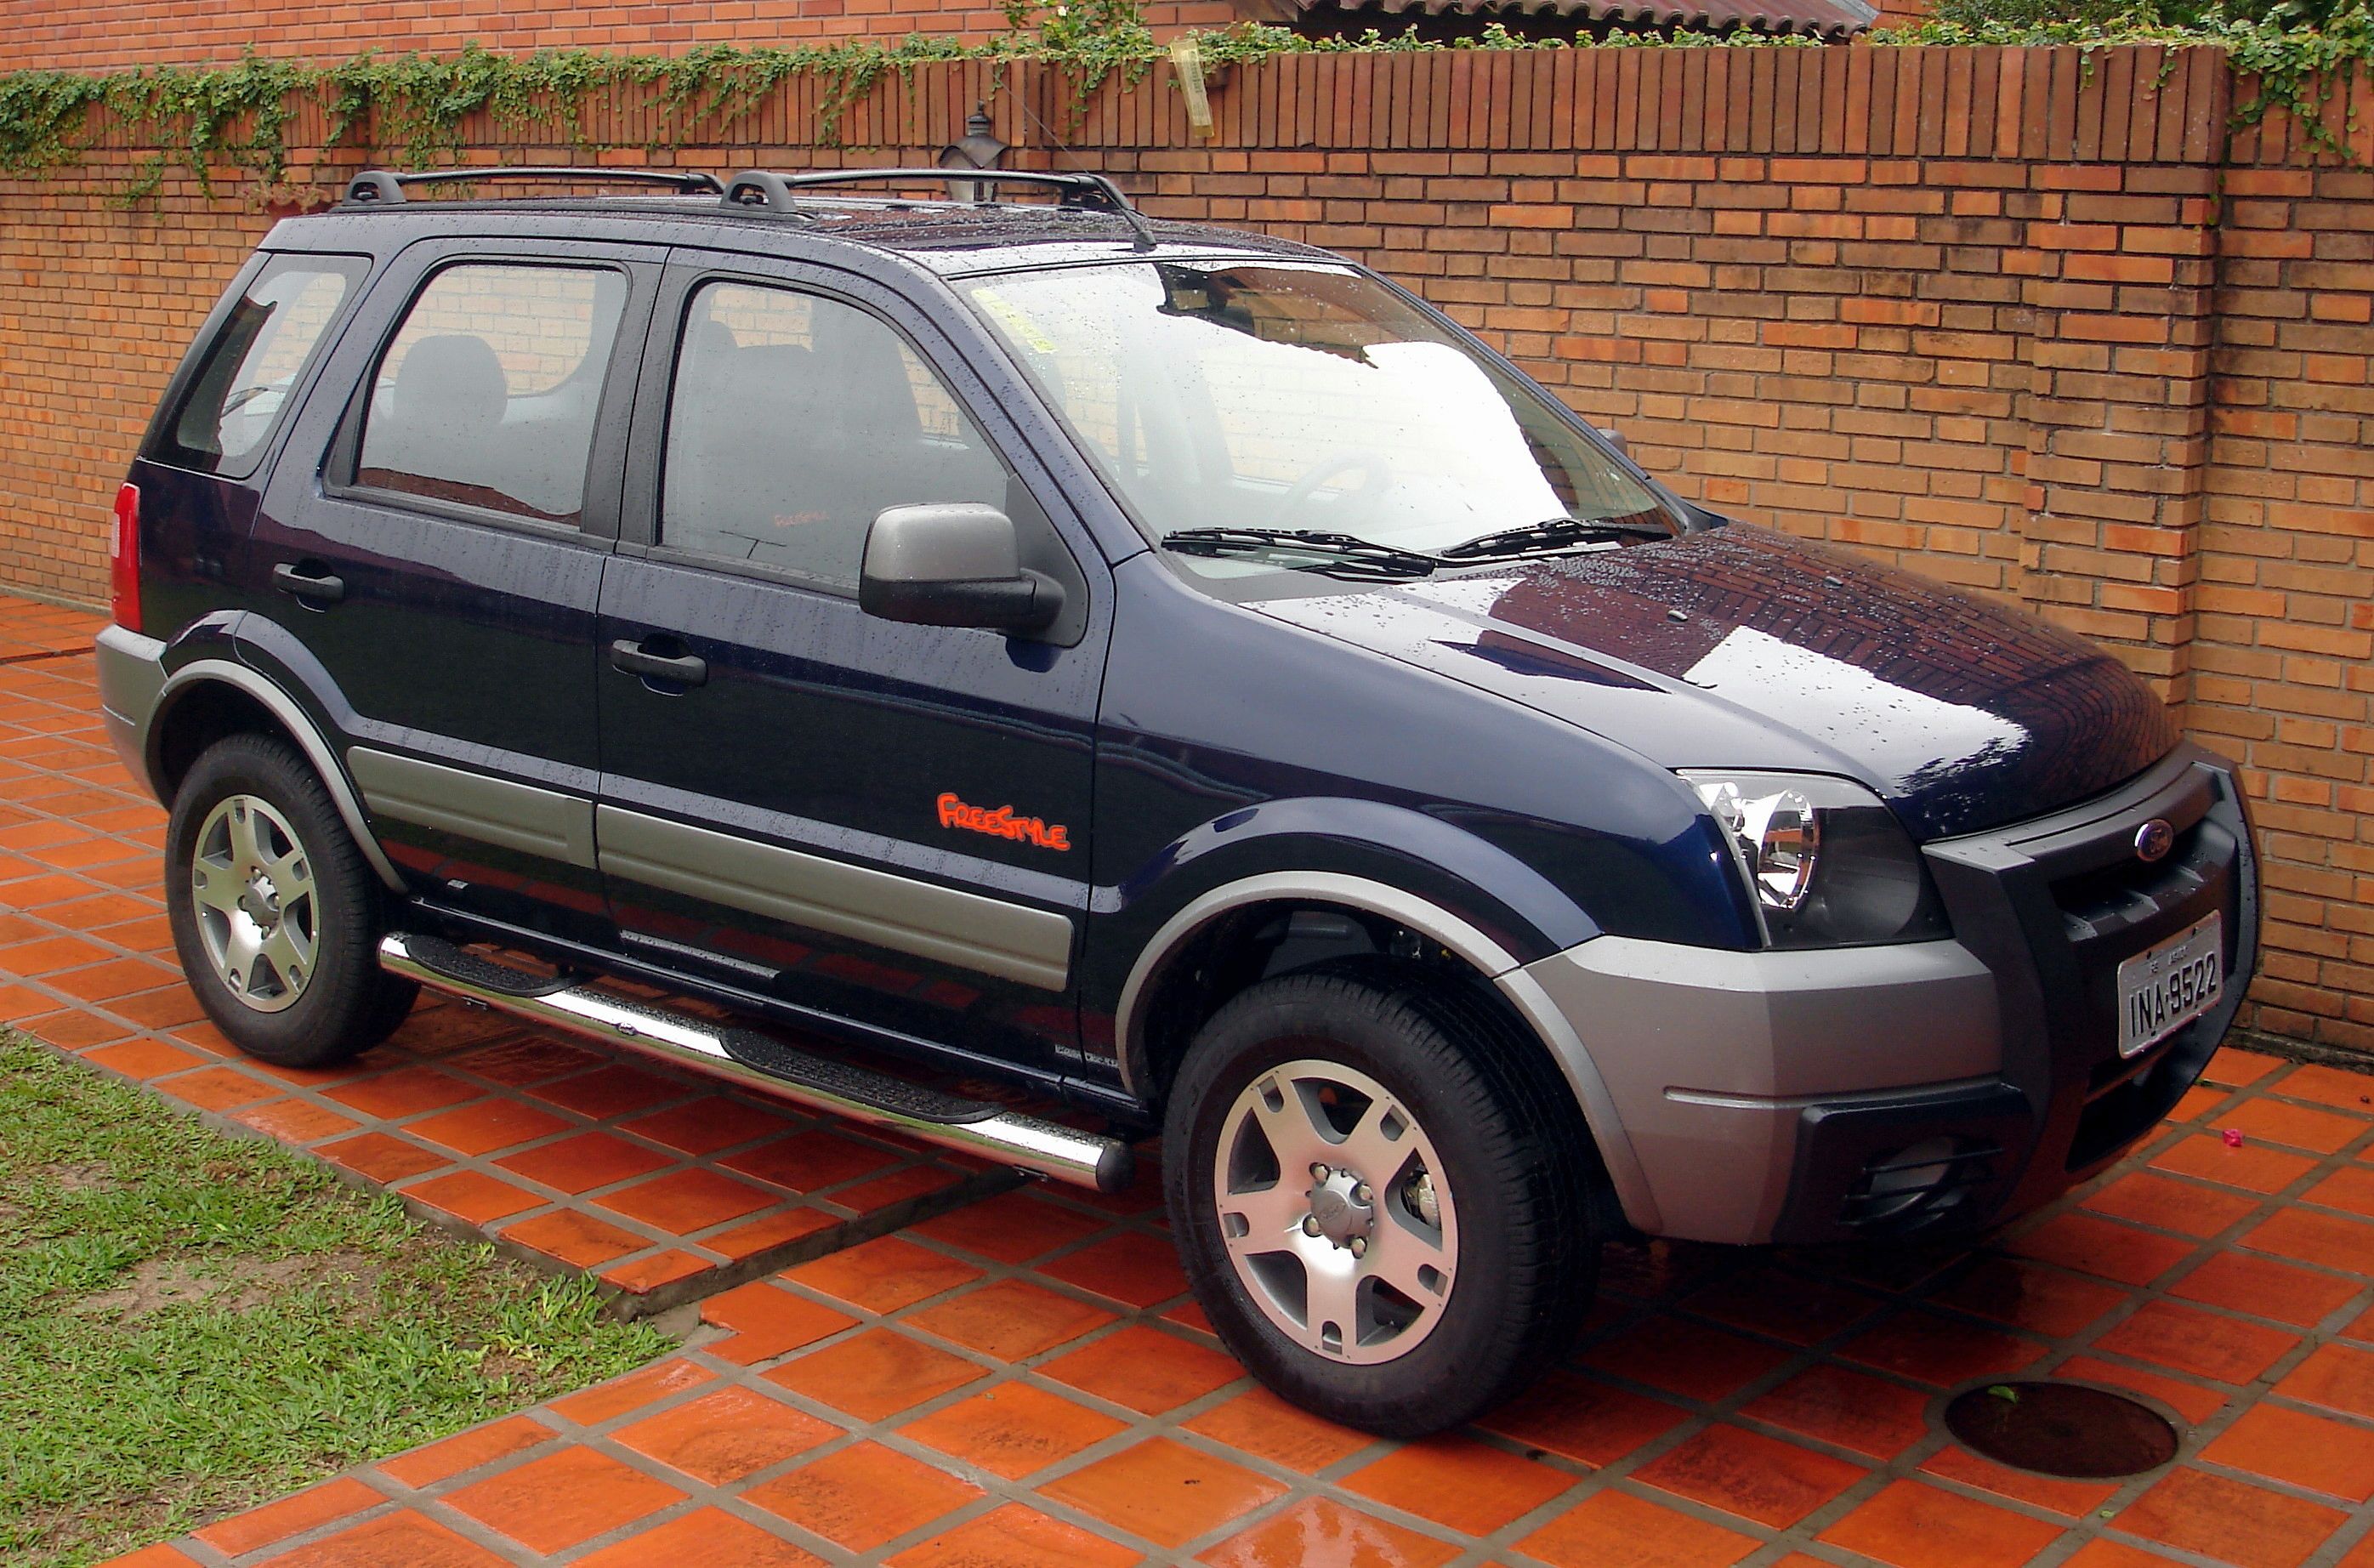 Fiat Palio, Tractor & Construction Plant Wiki